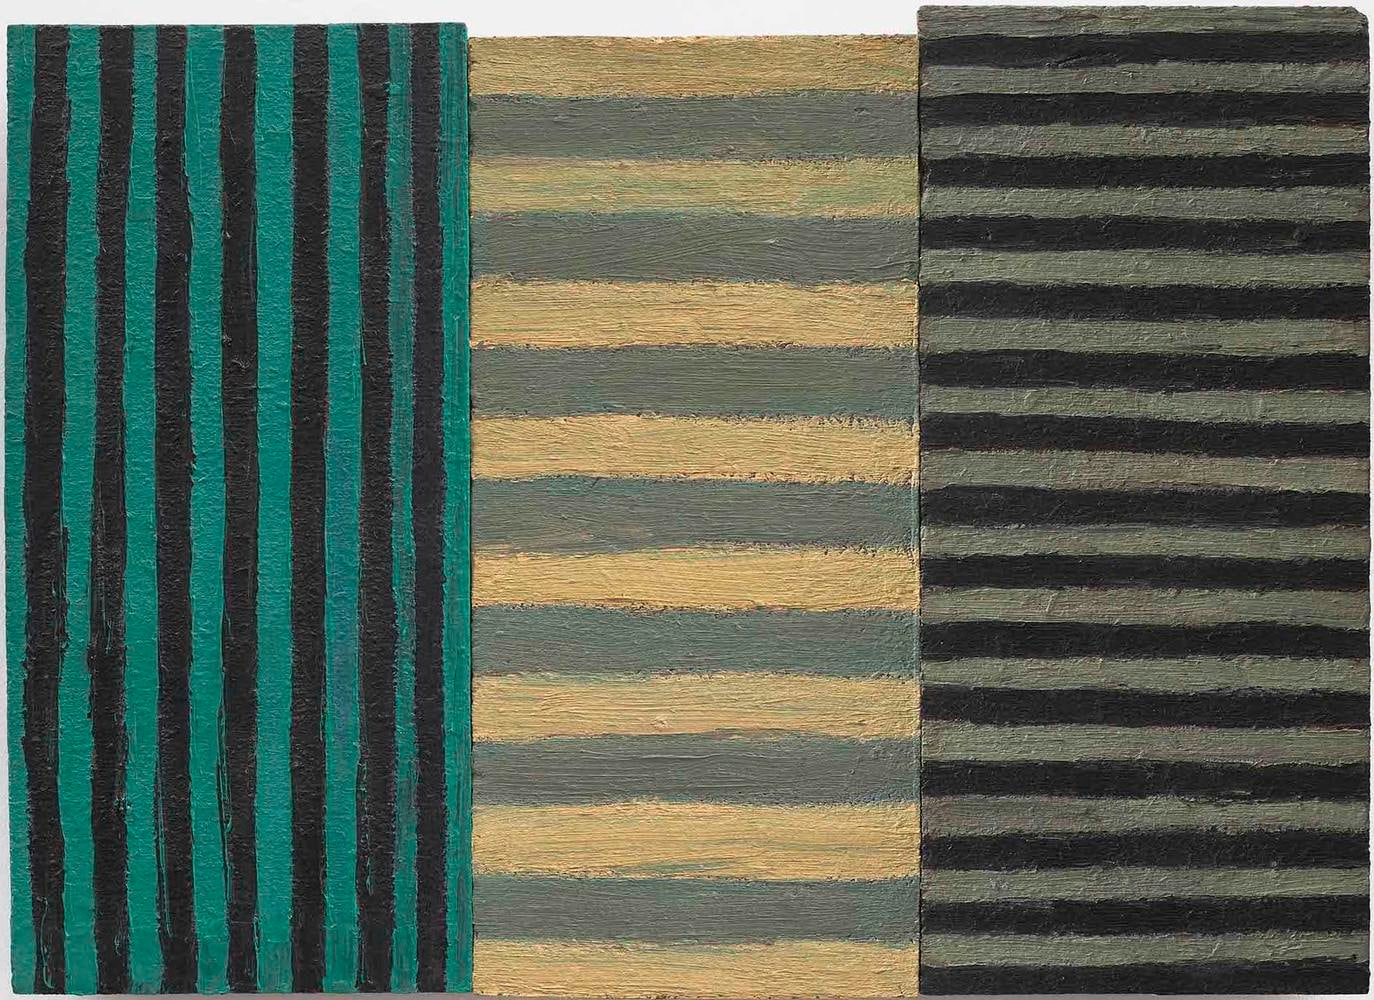 Sean Scully

Bonin

1982

oil on masonite with wood support

18 x 24 1/2 inches (45.7 x 62.2 cm)